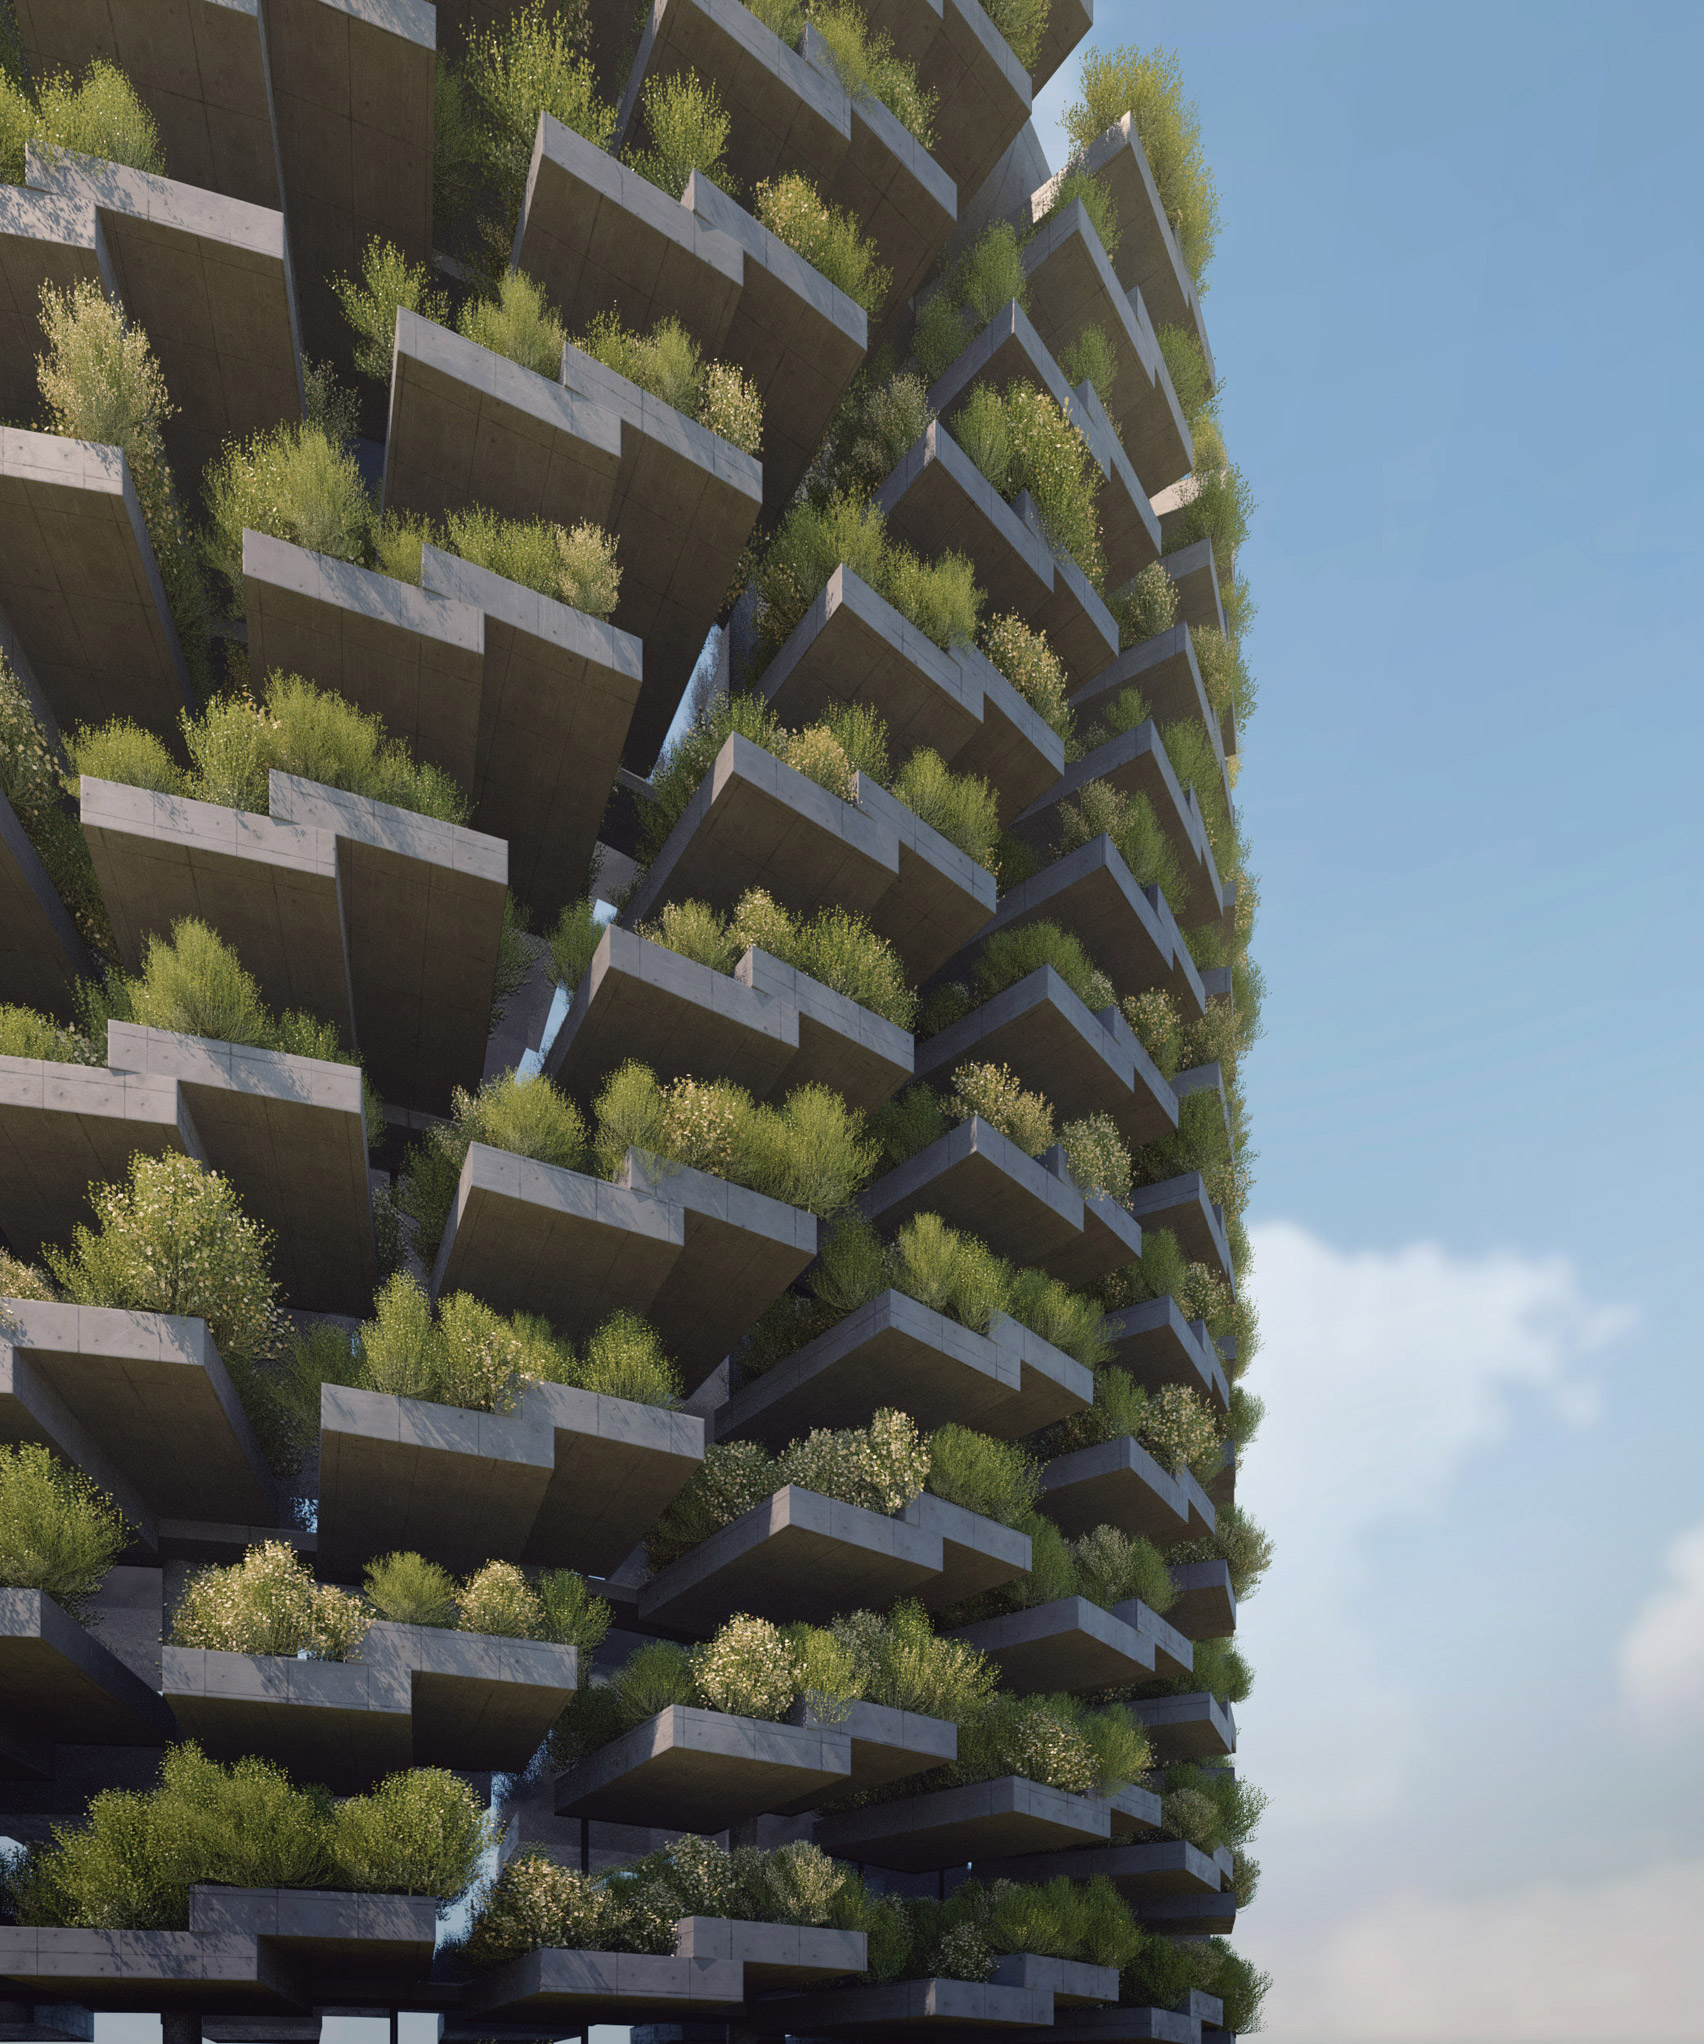 They also convert carbon dioxide into oxygen via photosynthesis. The leaves of the plants will also shade the building to help it keep cool naturally in hot weather, and provide a buffer for noise.